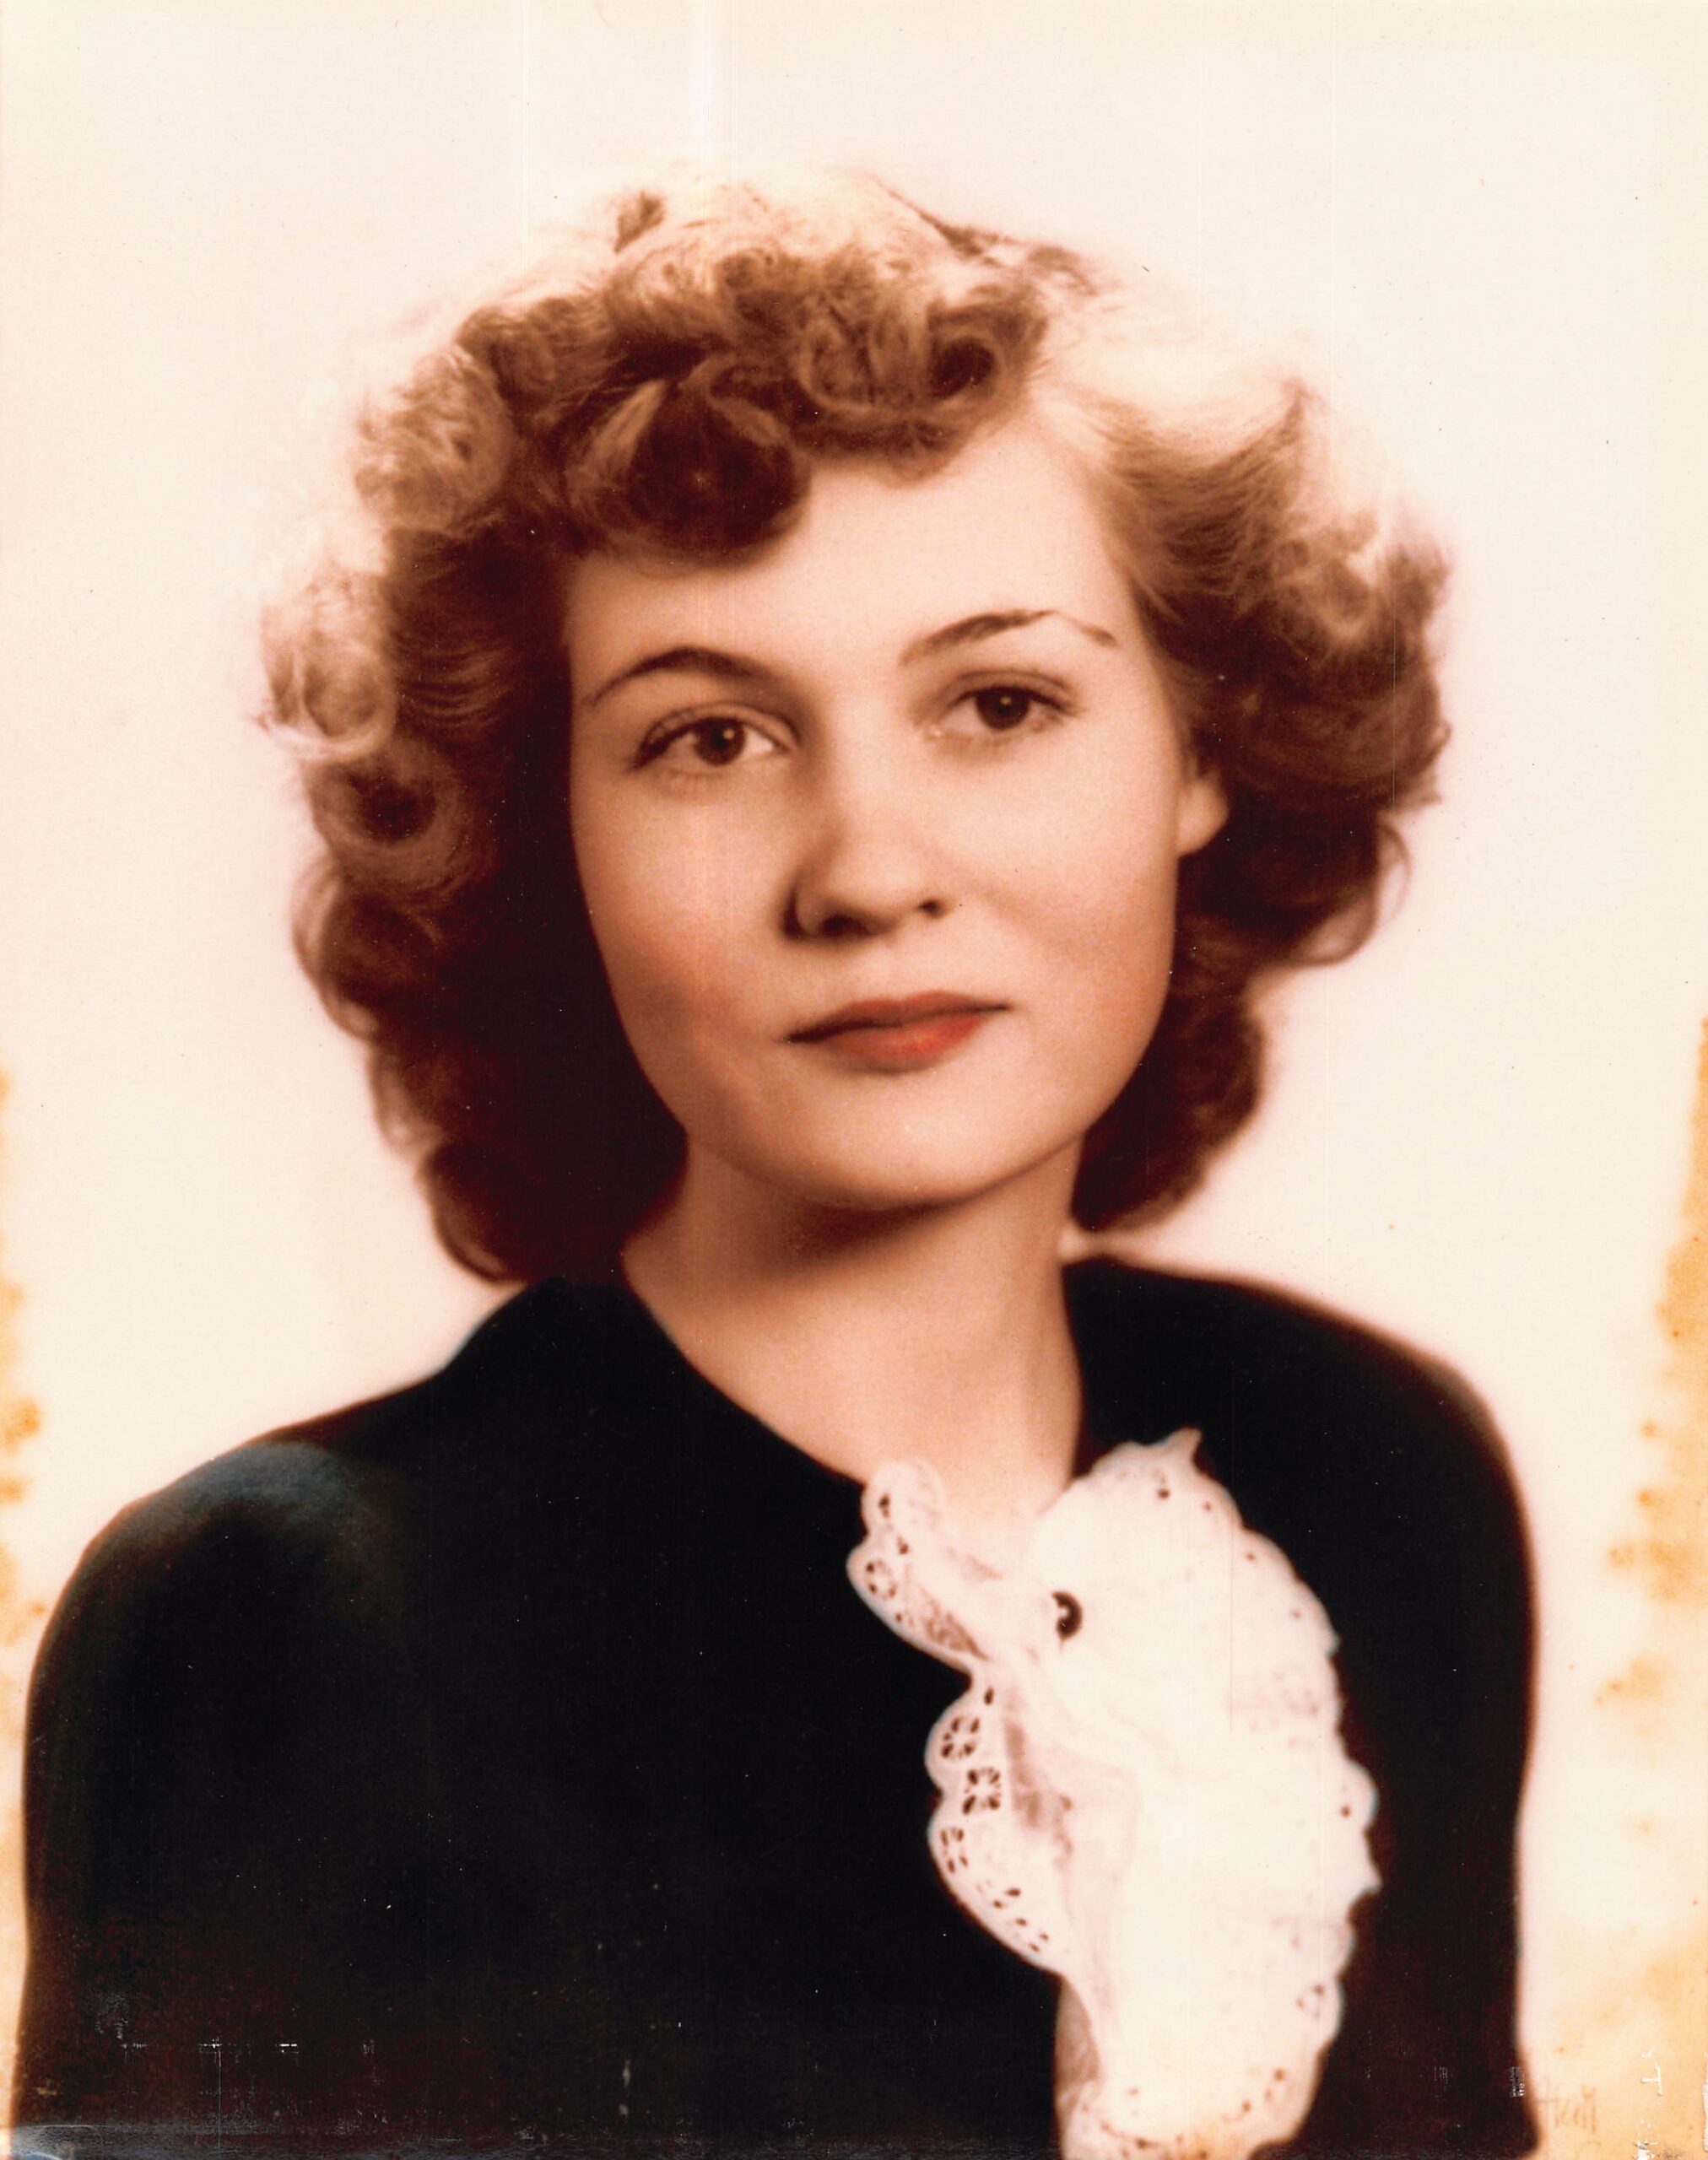 Obituary for Lillie Belle Renshaw